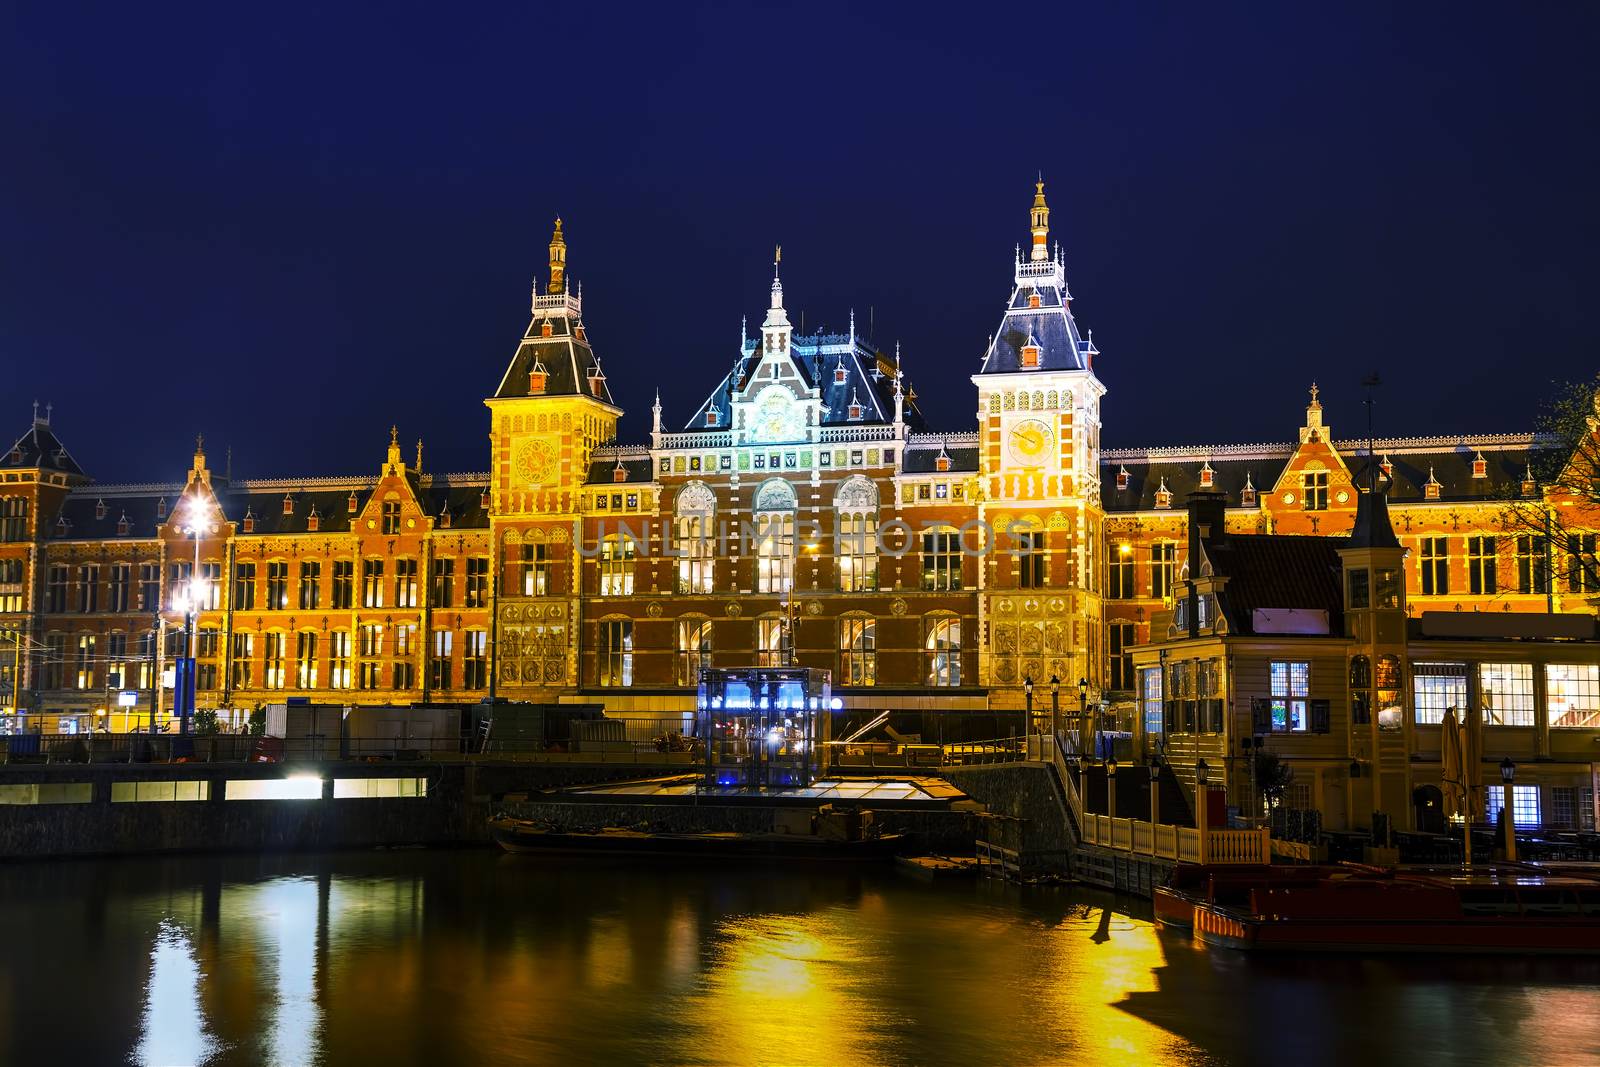 Amsterdam Centraal railway station by AndreyKr